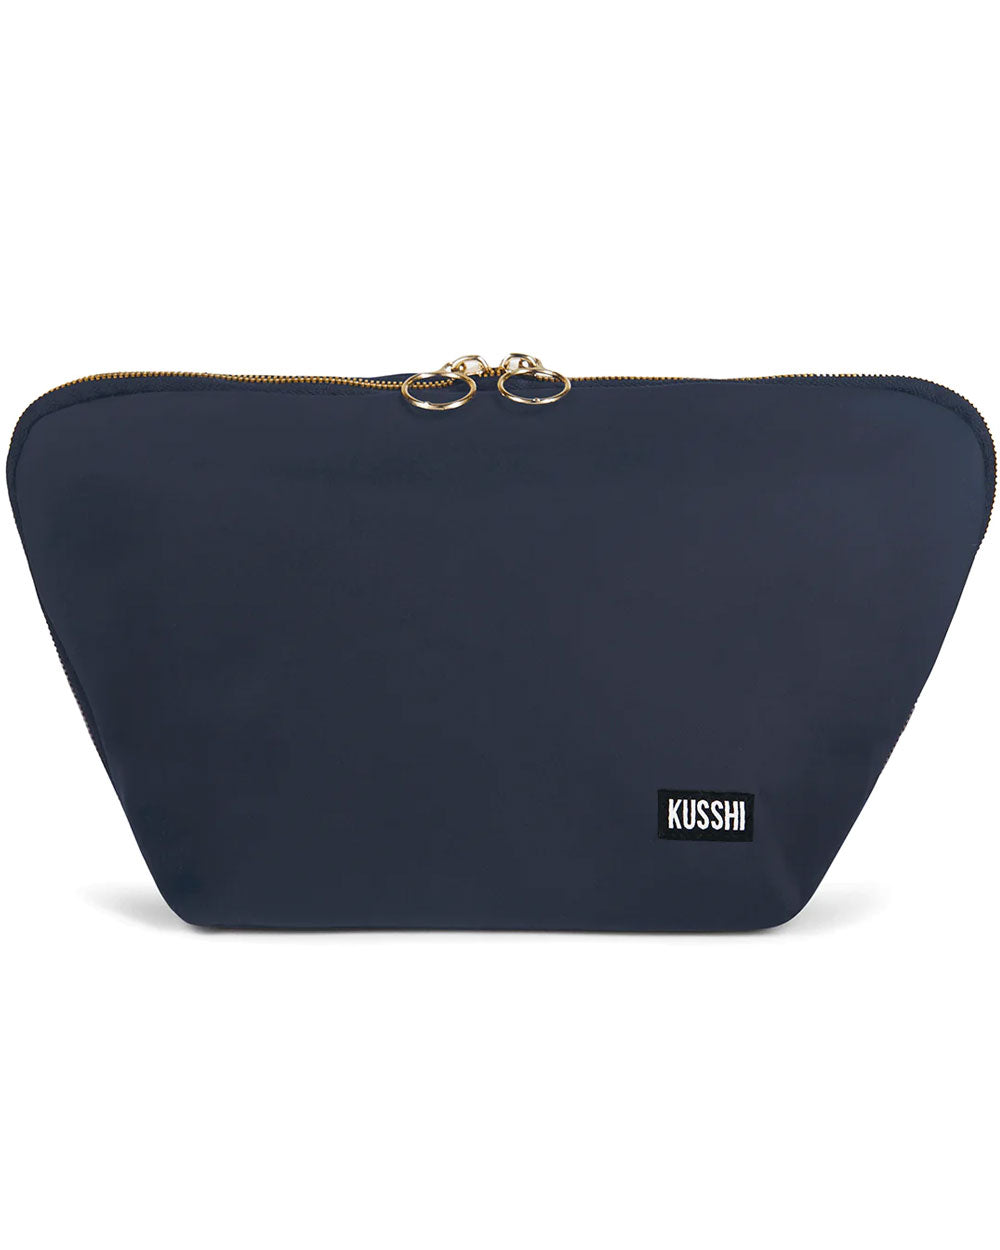 Large Vacationer Makeup Bag in Navy and Pink